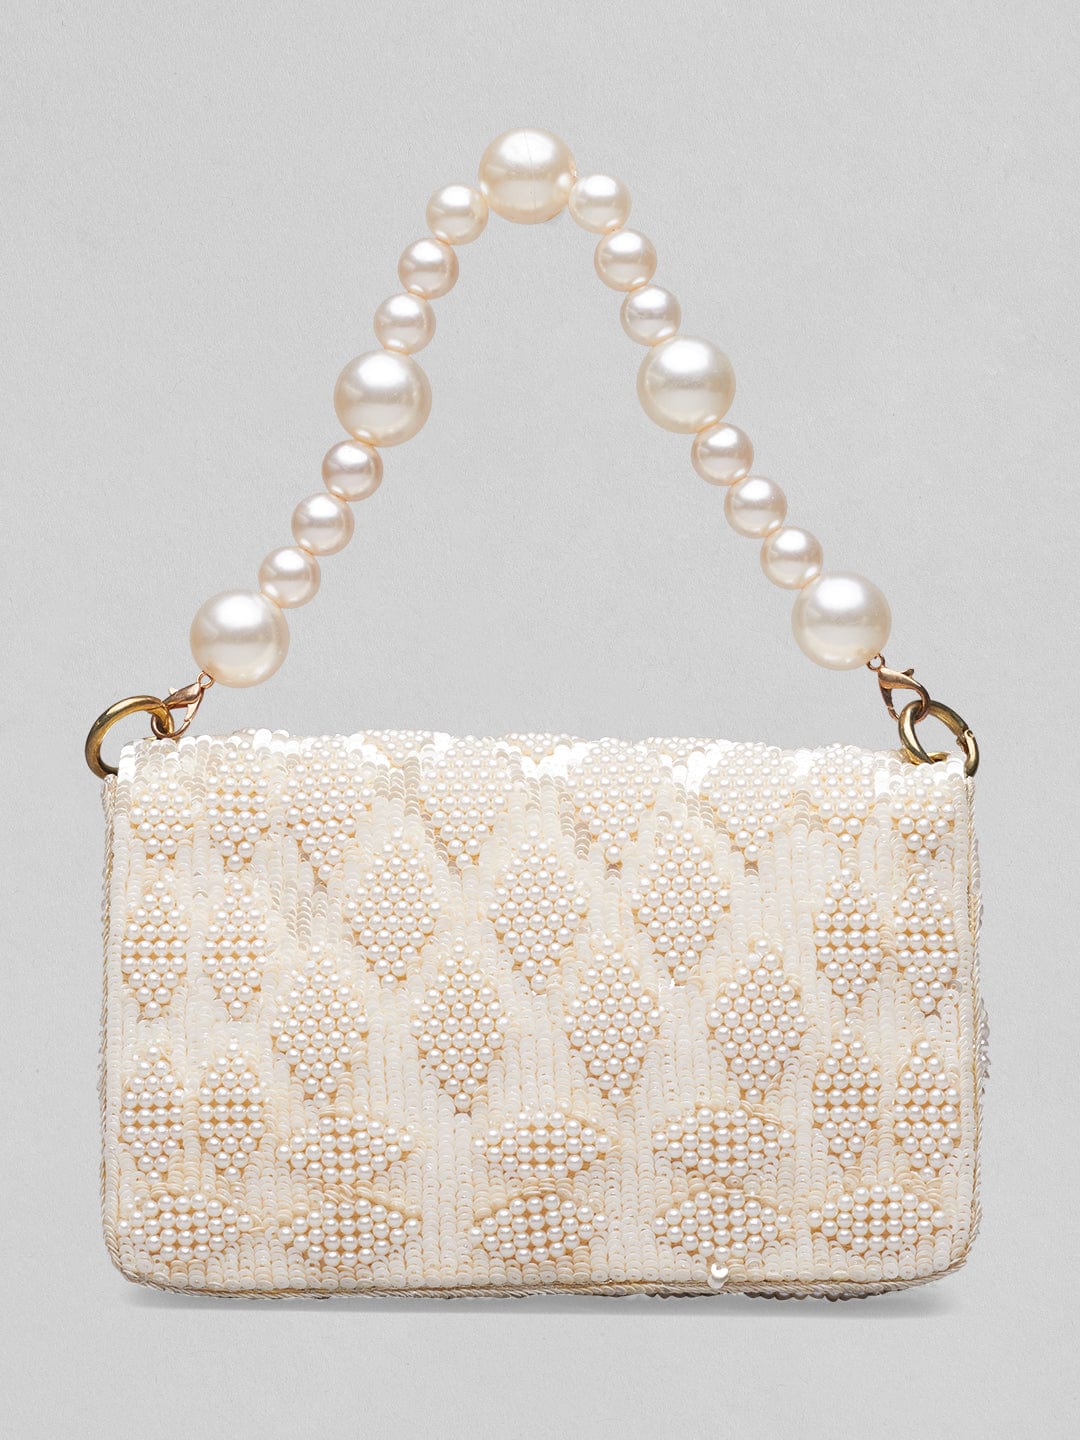 Rubans Cream Colour Handbag With Embroided Design And Pearls Handbag, Wallet Accessories &amp; Clutches